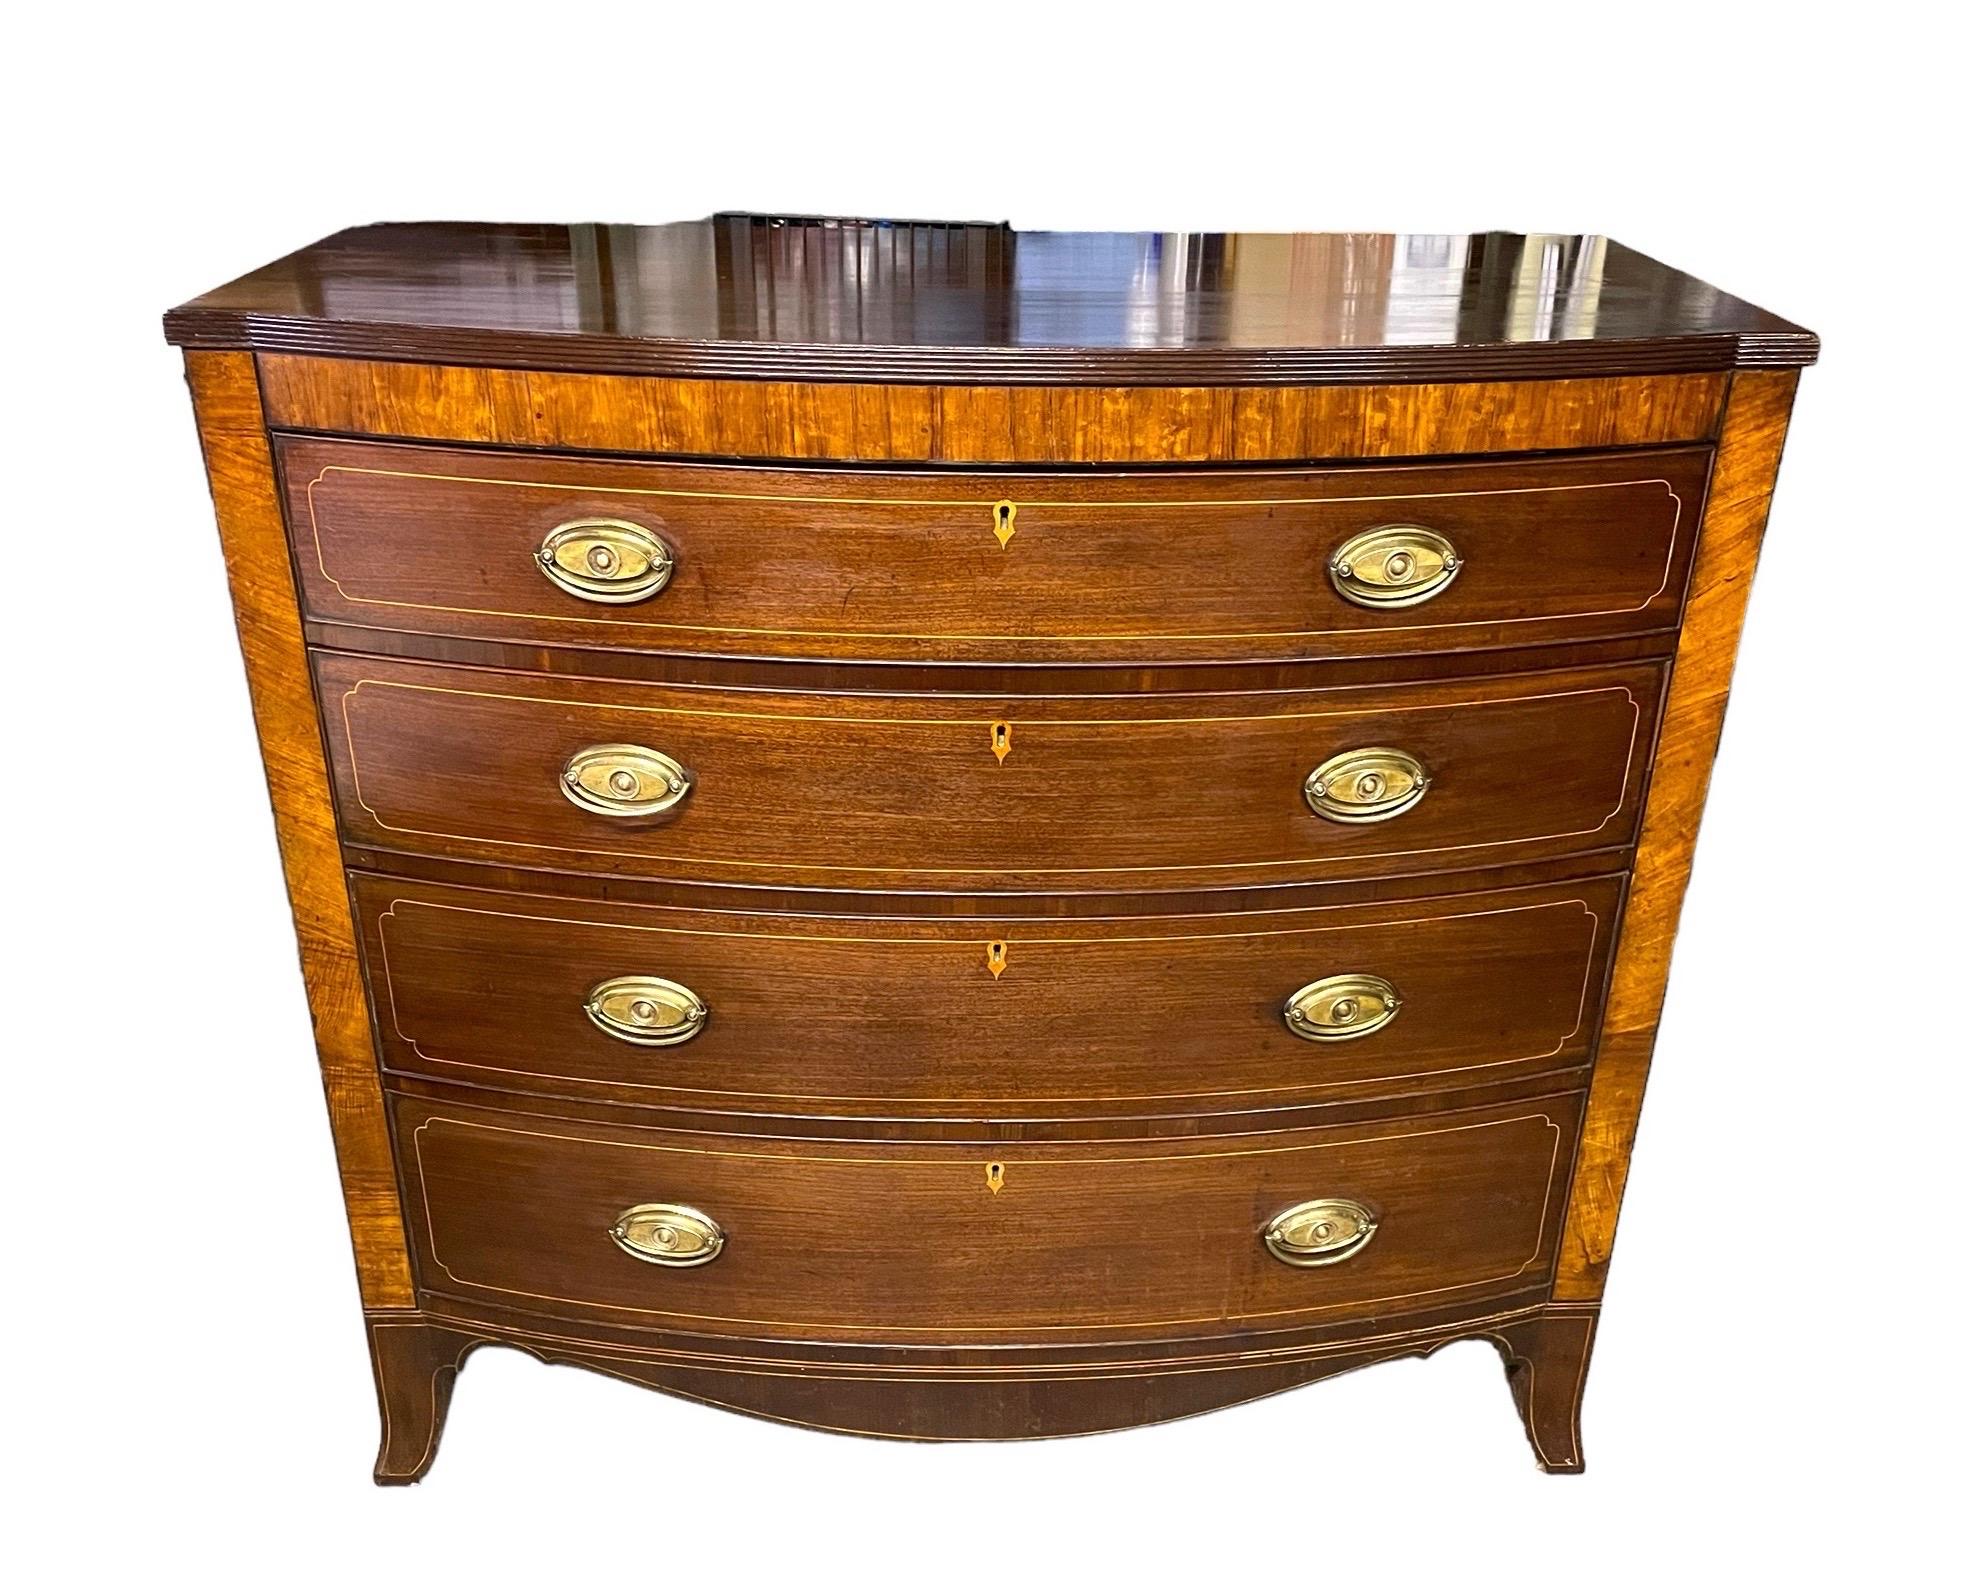 A finely drawn chest of drawers with four long drawers, the top one with a double divider, the drawer fronts are lined in boxwood and set with a quality inlaid escutcheon, the chest all supported on fine design splay feet, the piece is in good